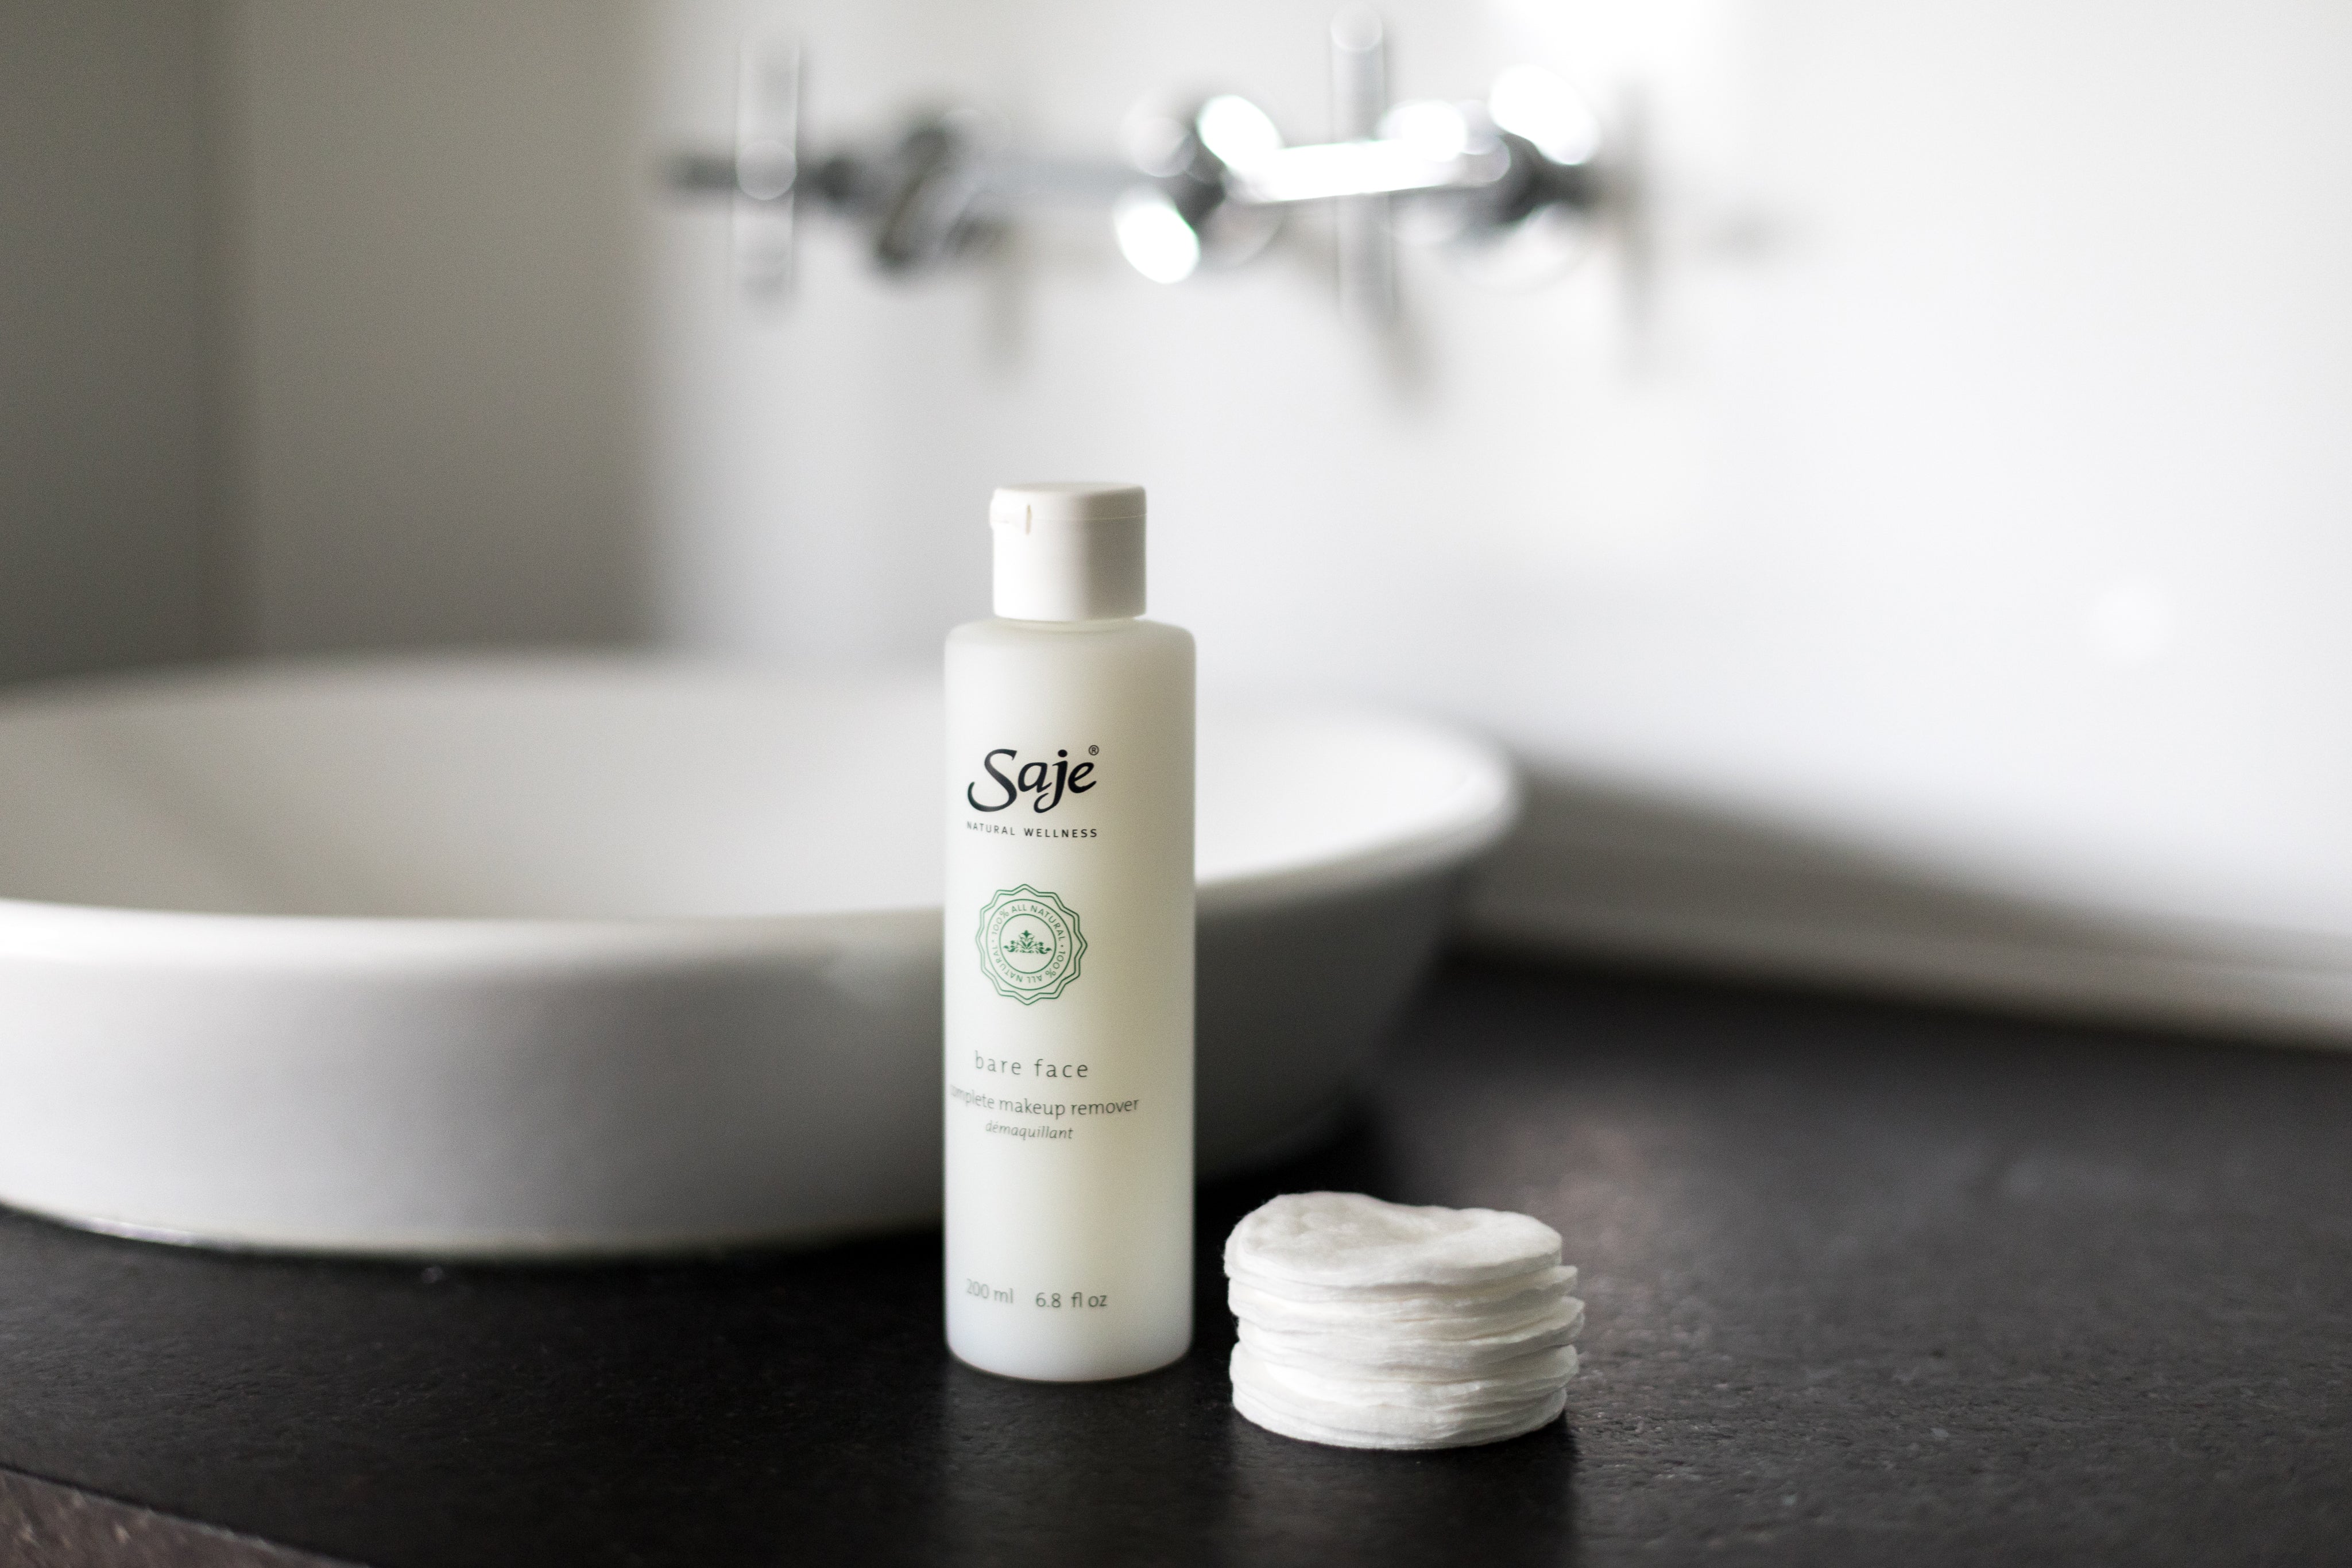 Saje bare face makeup remover on a bathroom counter next to a stack of round cotton pads